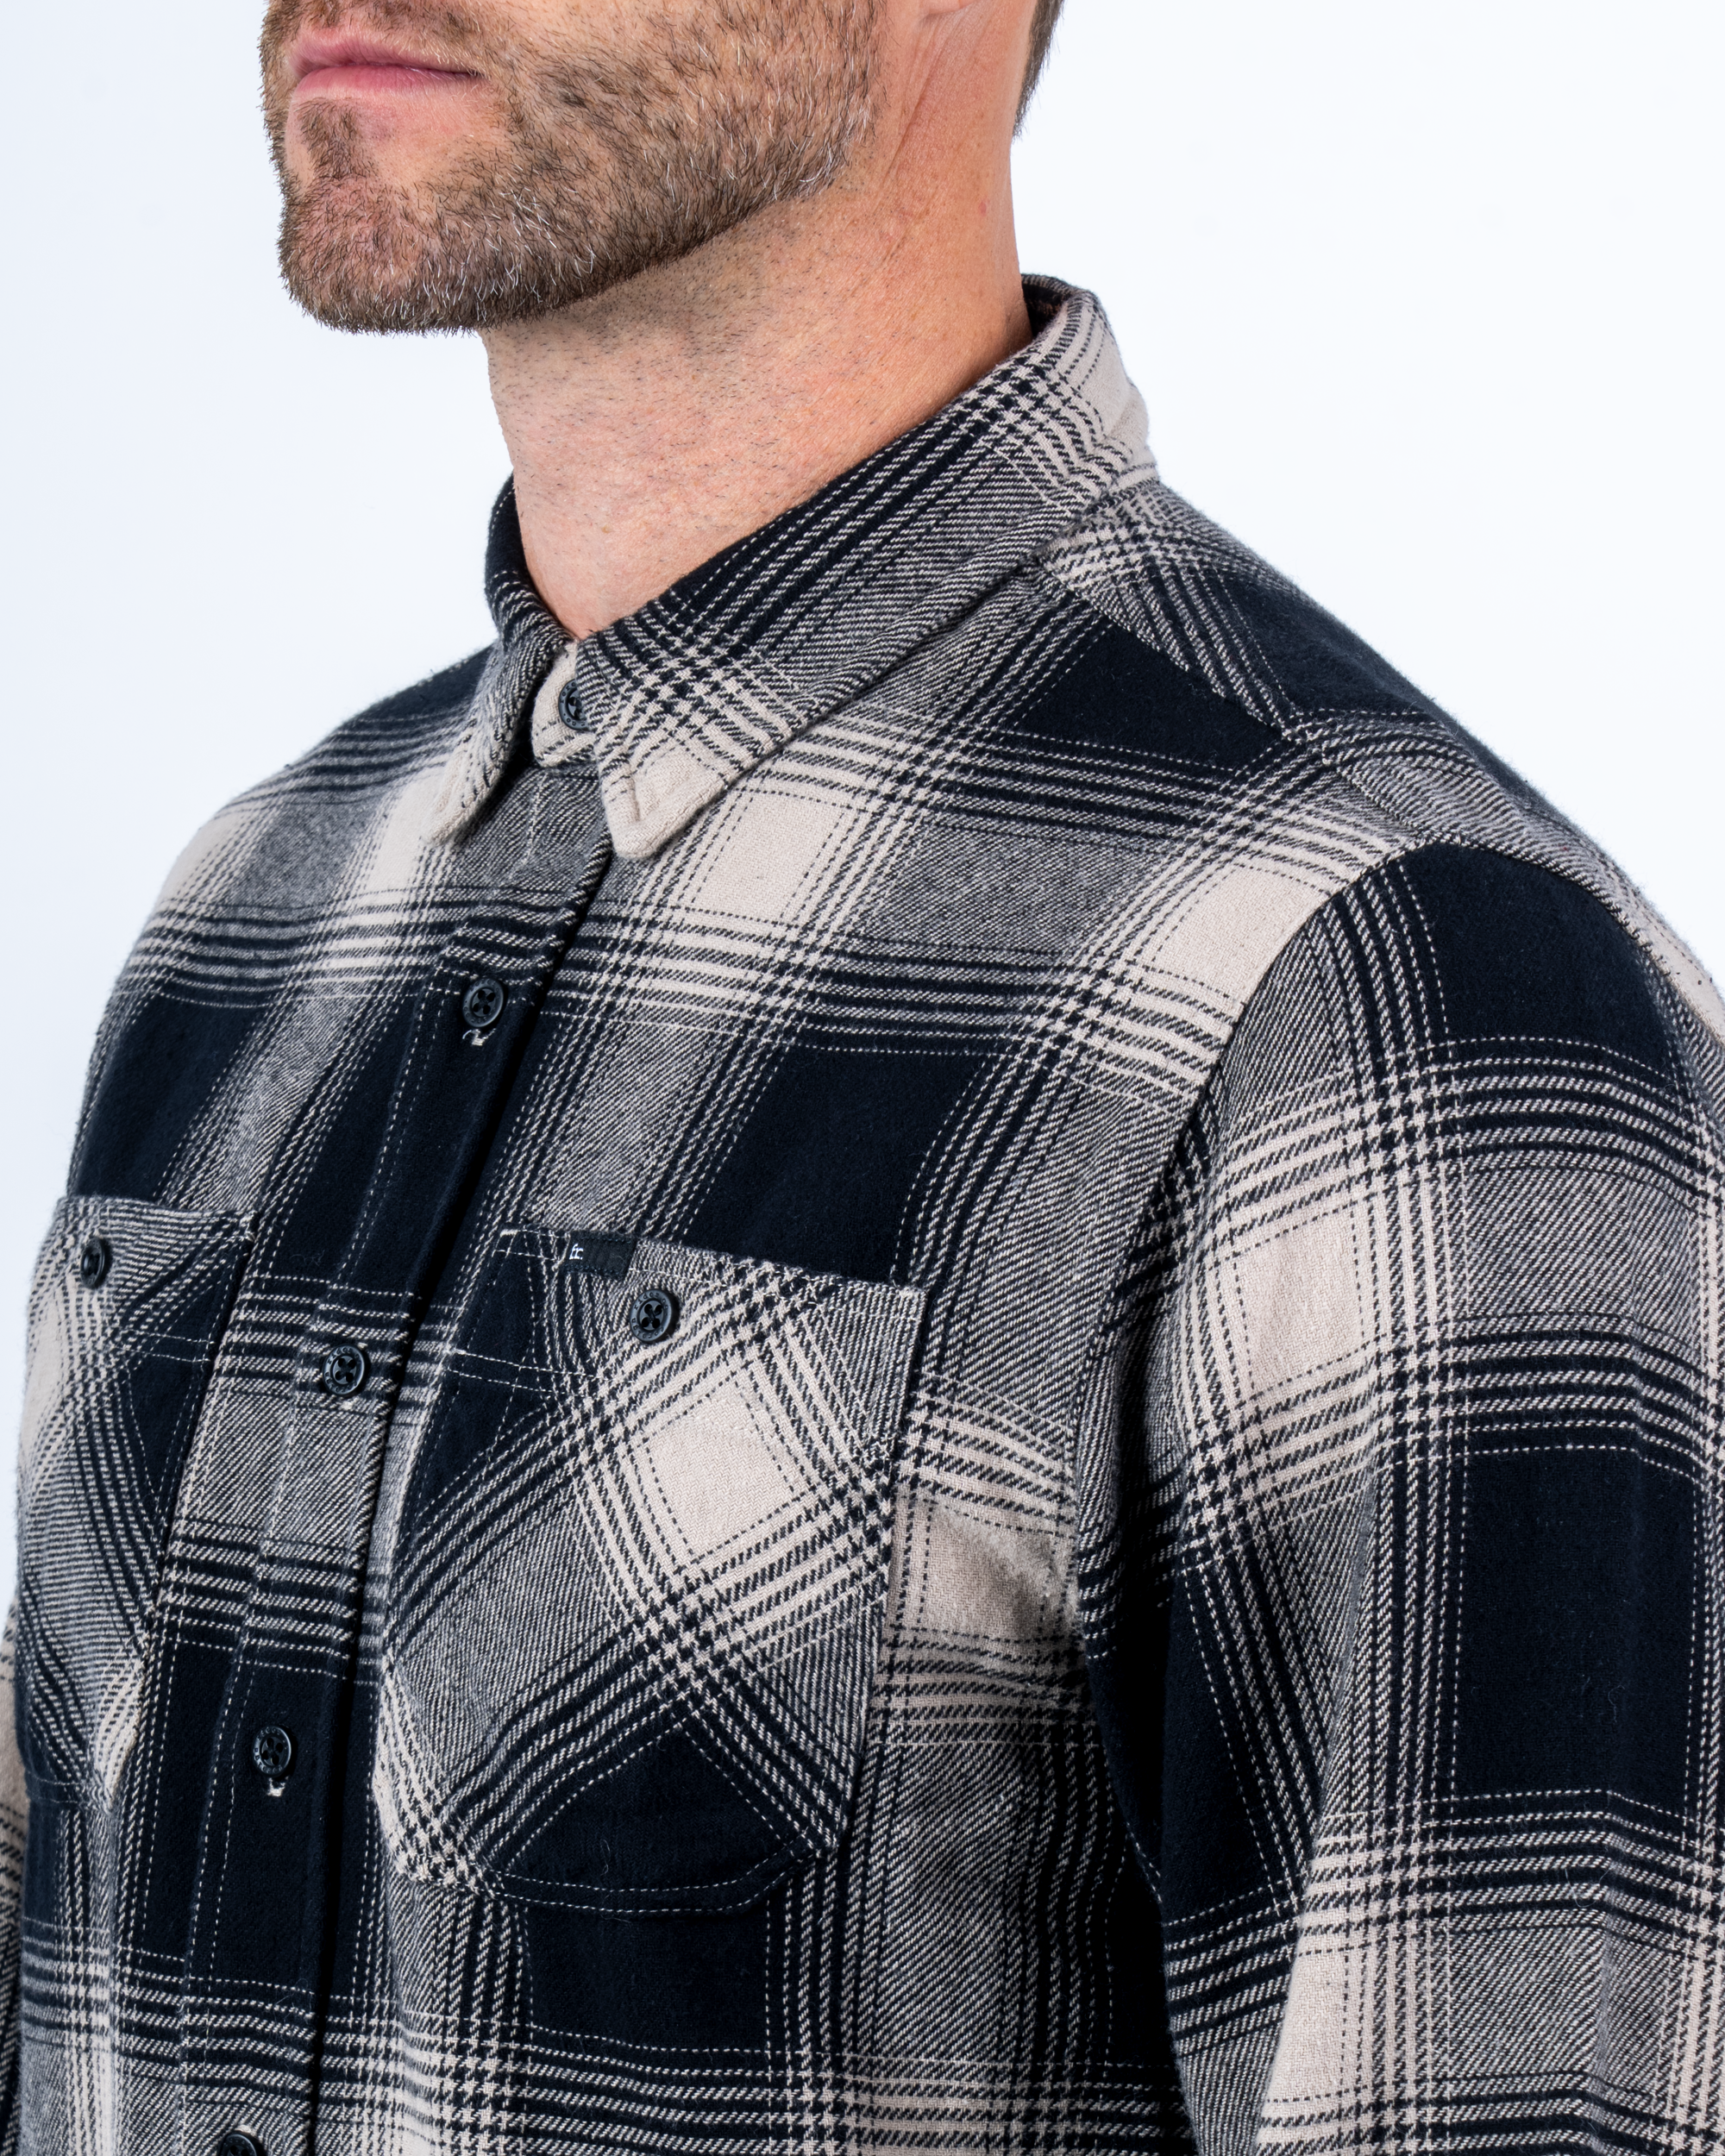 Foreign Rider Co Organic Cotton Black Flannel Plaid Long Sleeve Button Up Shirt Chest Button Pocket and Shoulder Detail